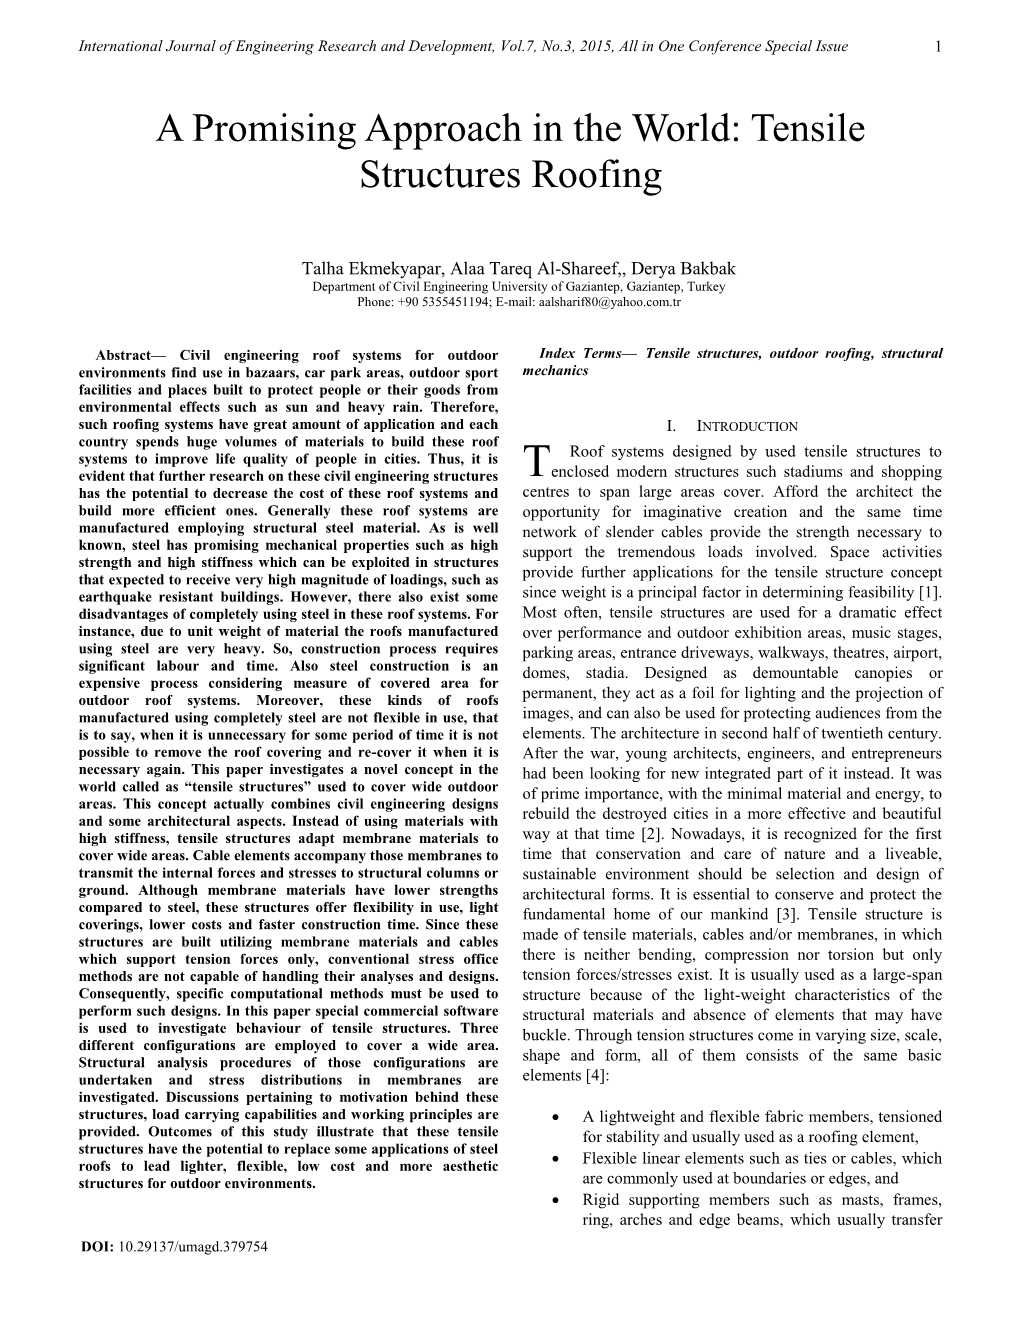 A Promising Approach in the World: Tensile Structures Roofing